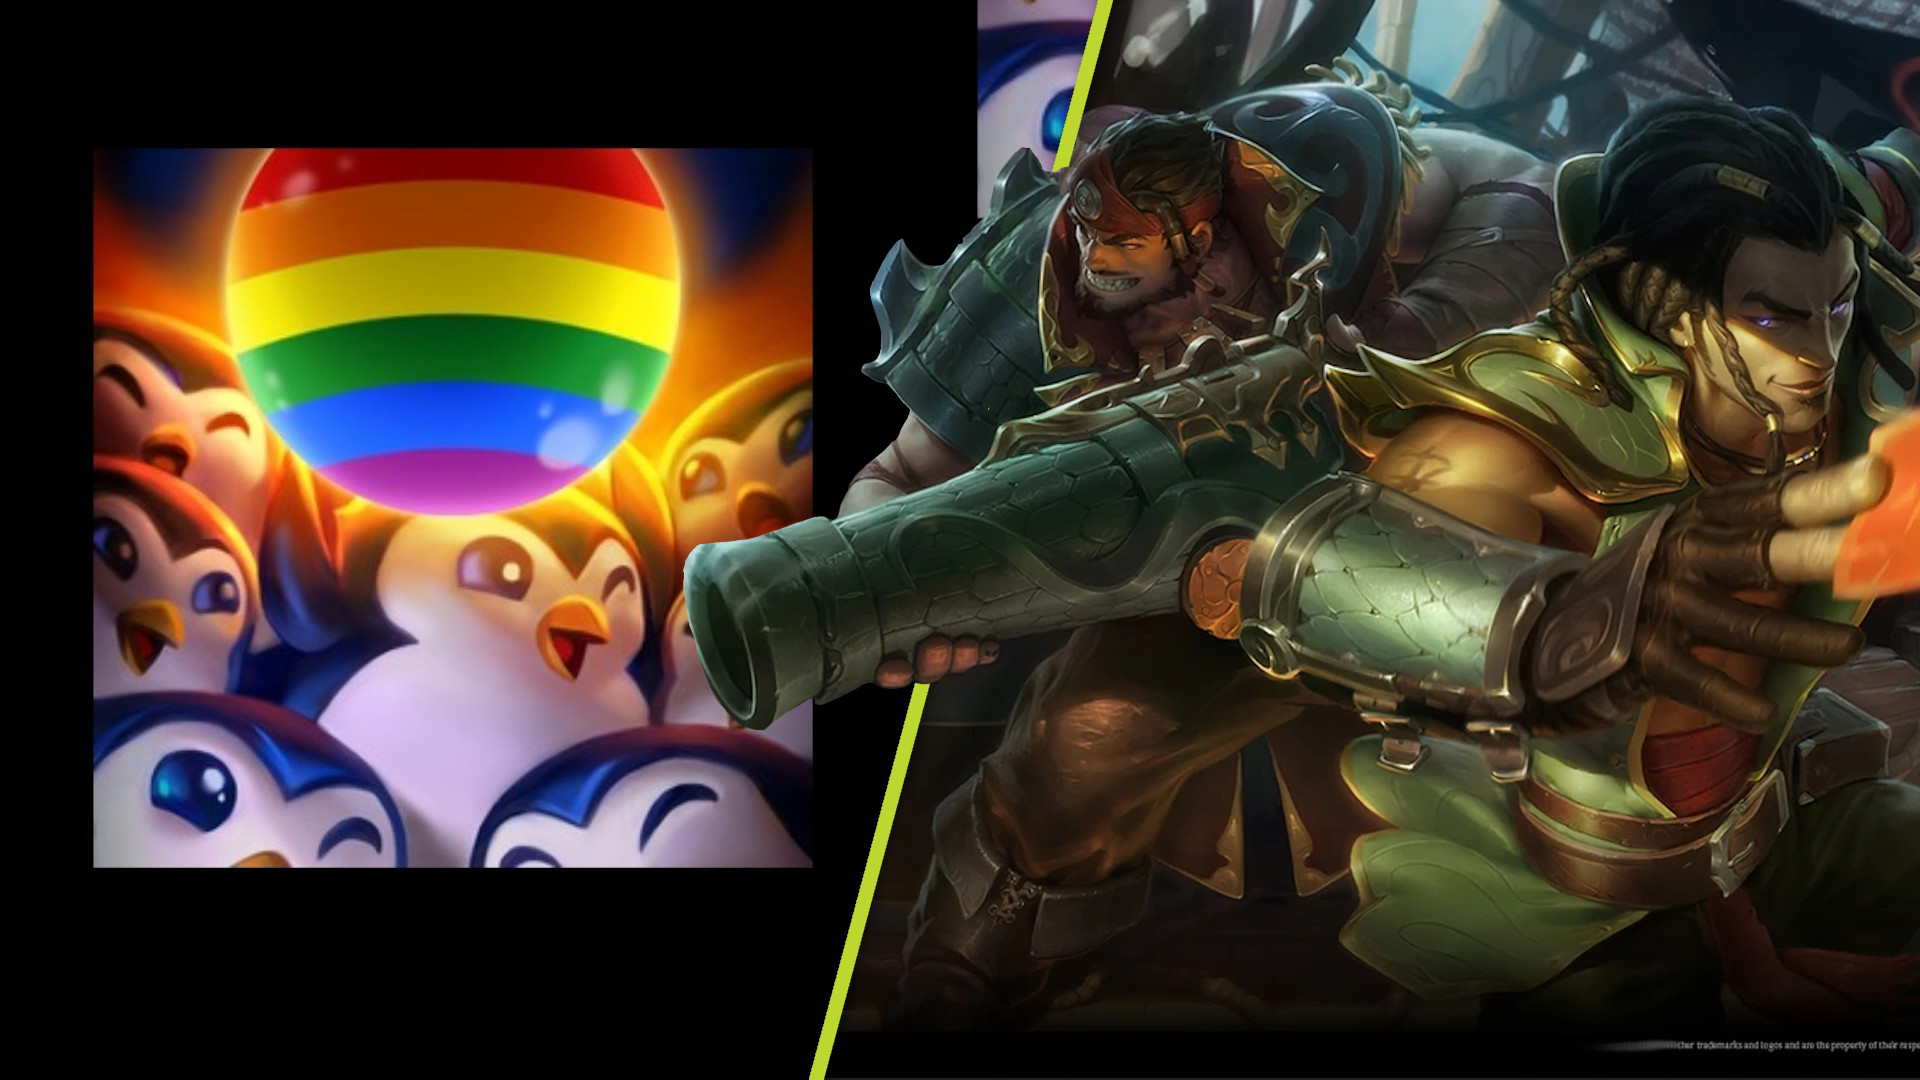 League of Legends Pride 2022 will feature Twisted Fate and Graves